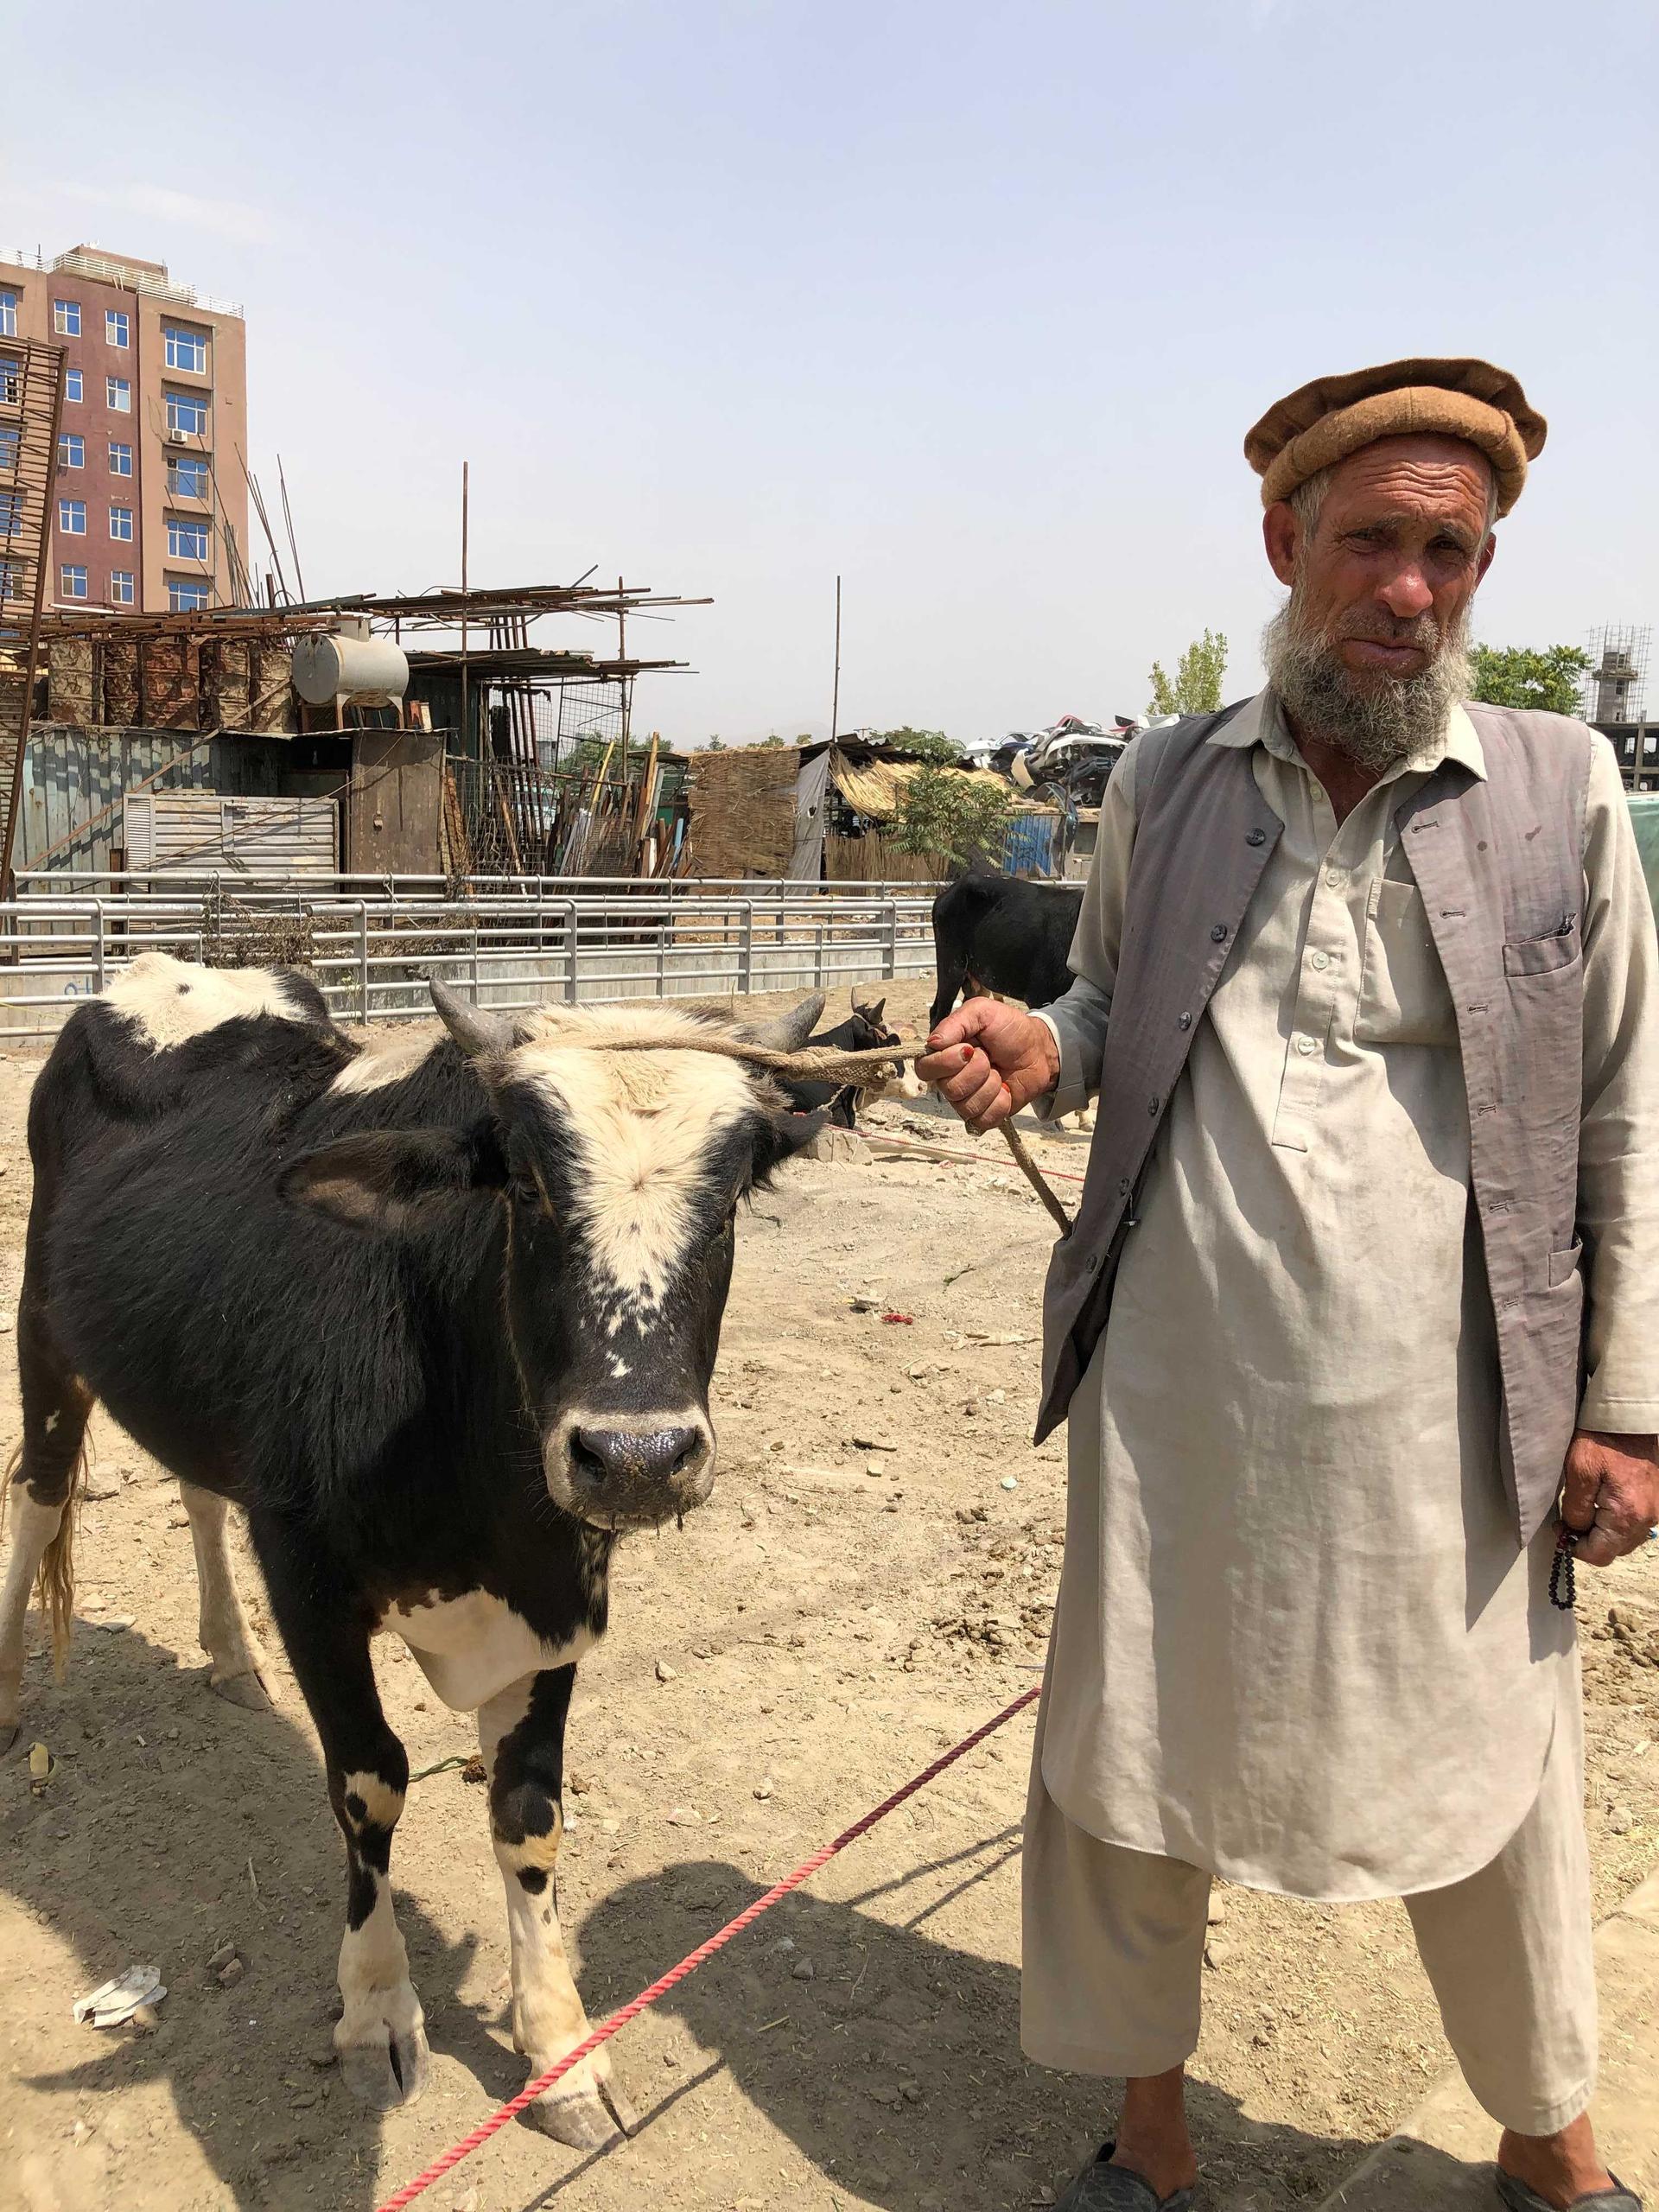 Khale Gol had to transport his cow through Taliban territory to get to Kabul. He raises them in the south, where it’s cheaper, and brings them to Kabul to sell at a profit. This year, the fighting was much more intense, he says.